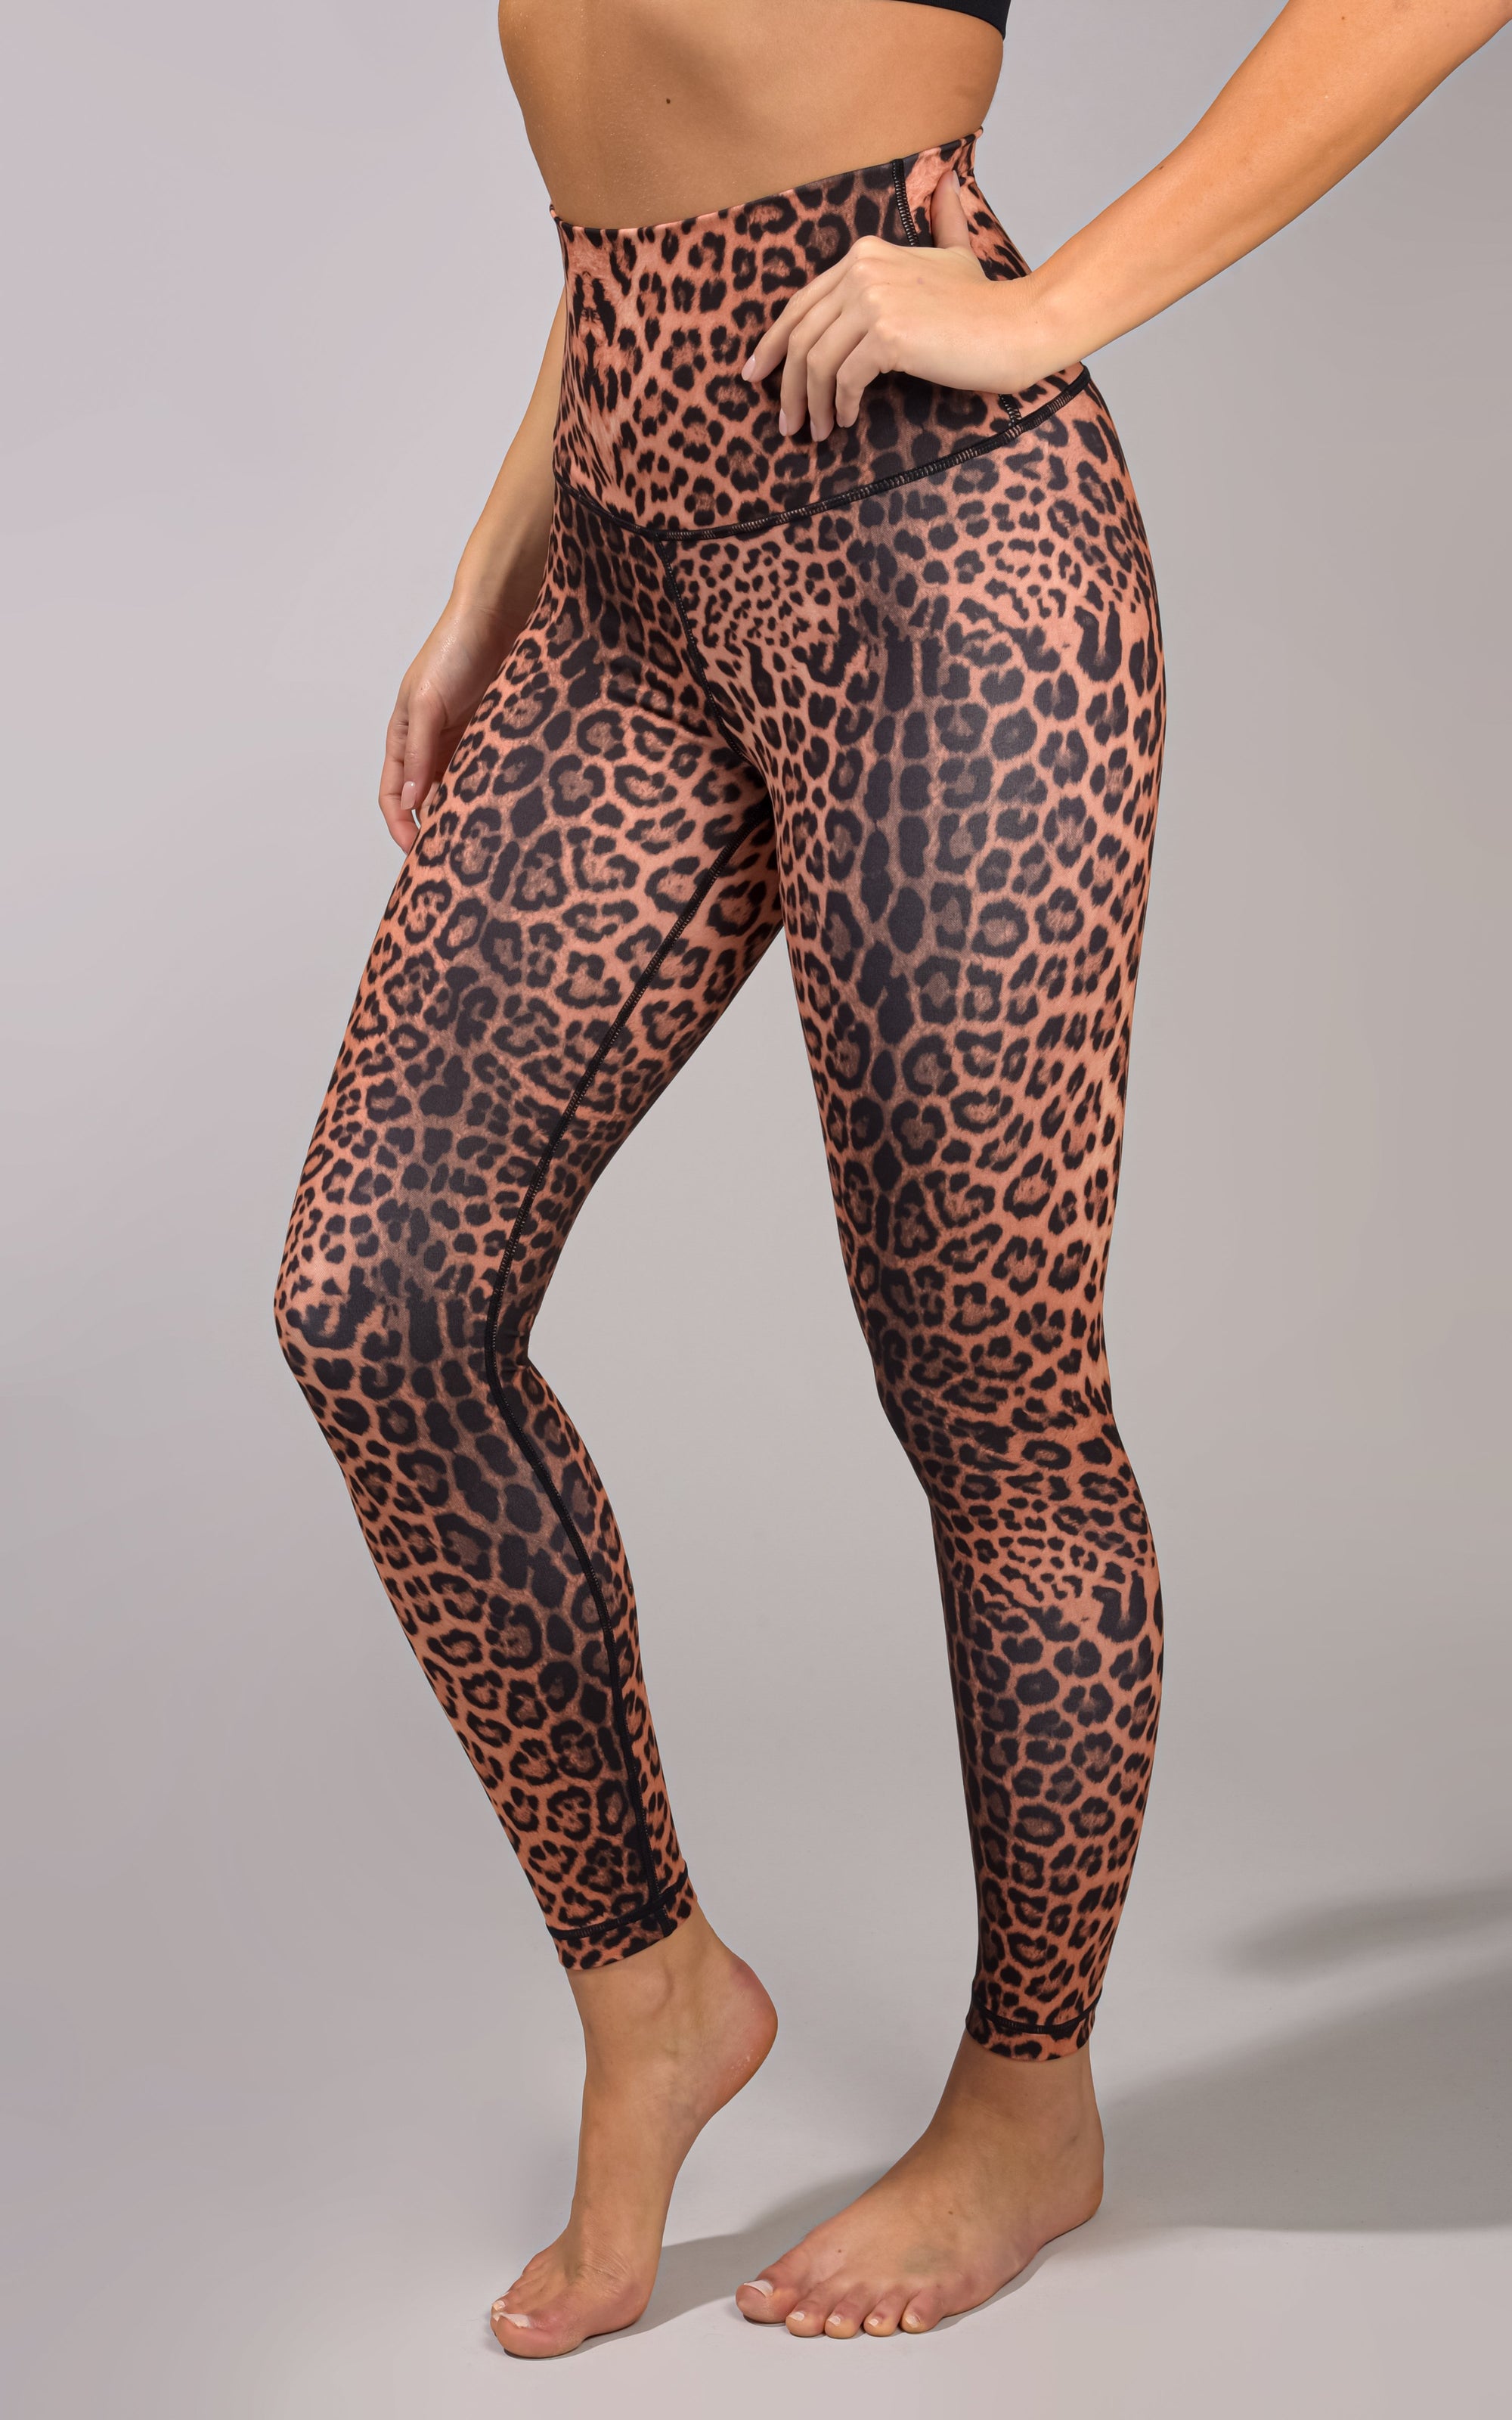 Leaf Print High Waist Patterned Leggings For Women For Women Fashionable  And Slimming Fitness Pants By Brand 211019 From Lu01, $9.39 | DHgate.Com